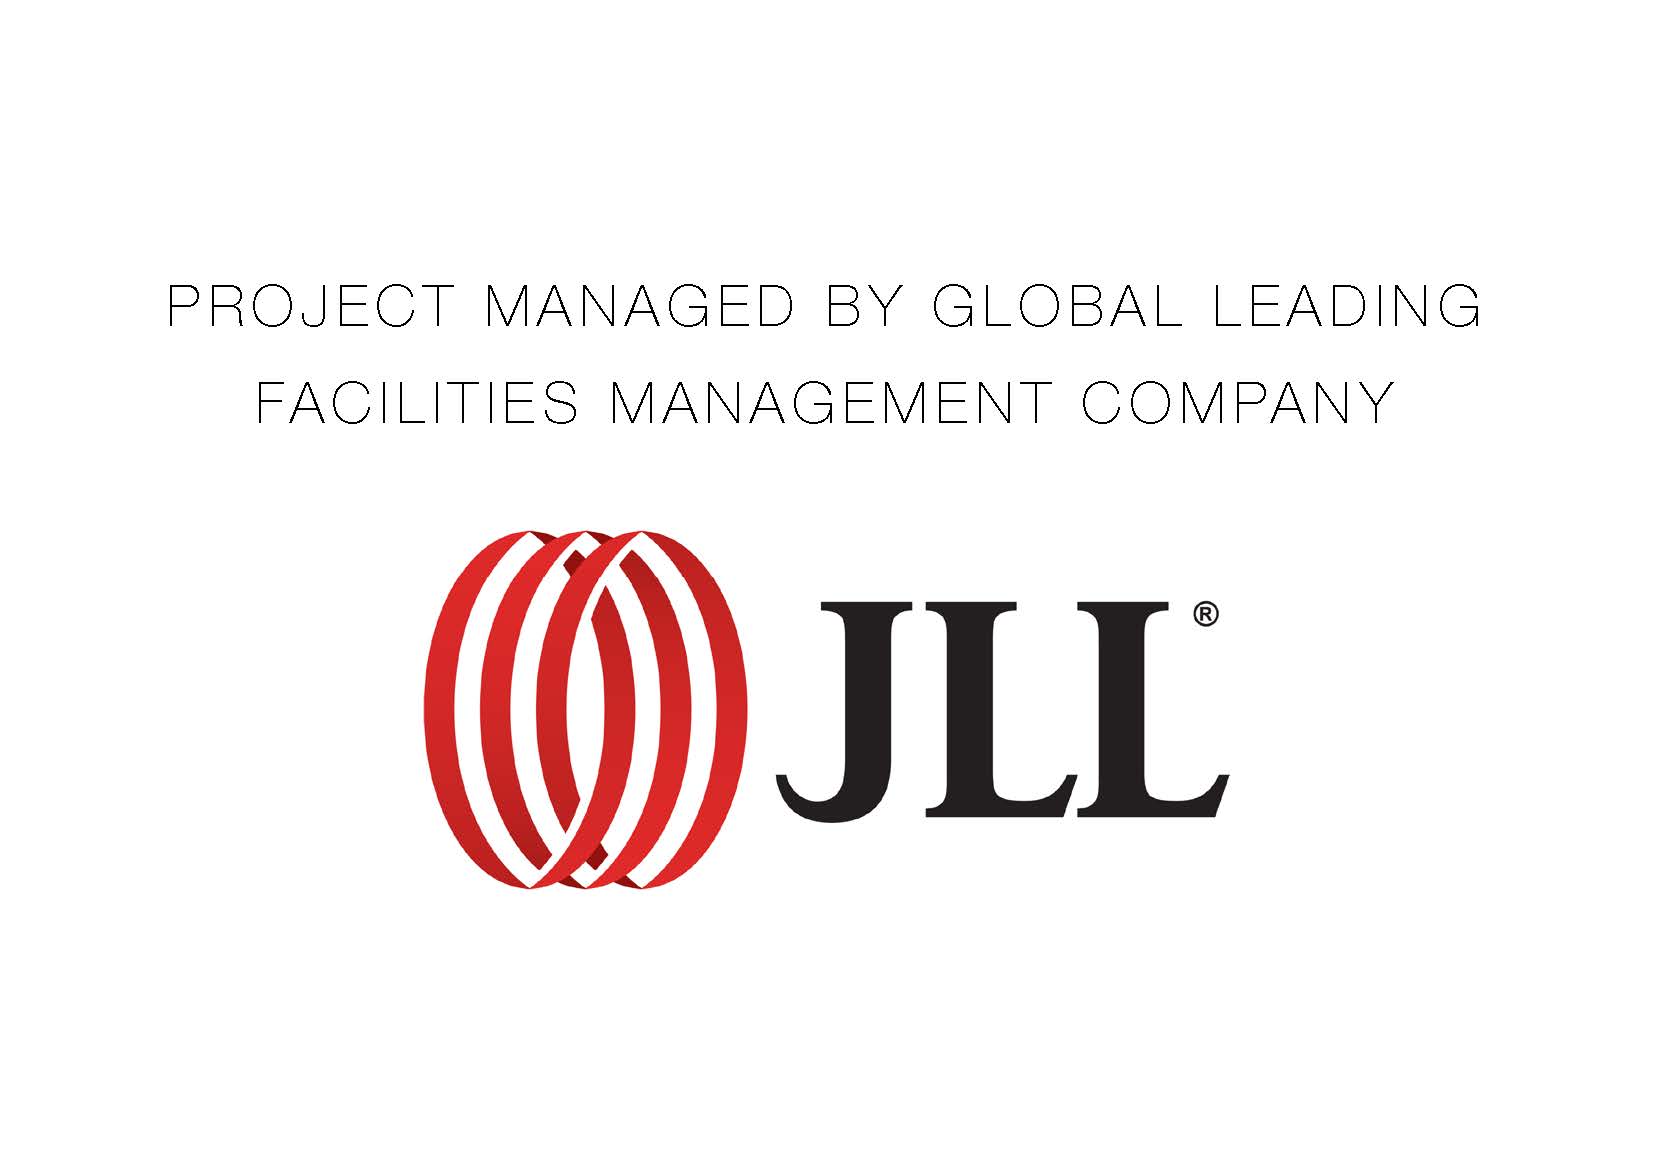 Godrej Summit project managed by leading management company JLL